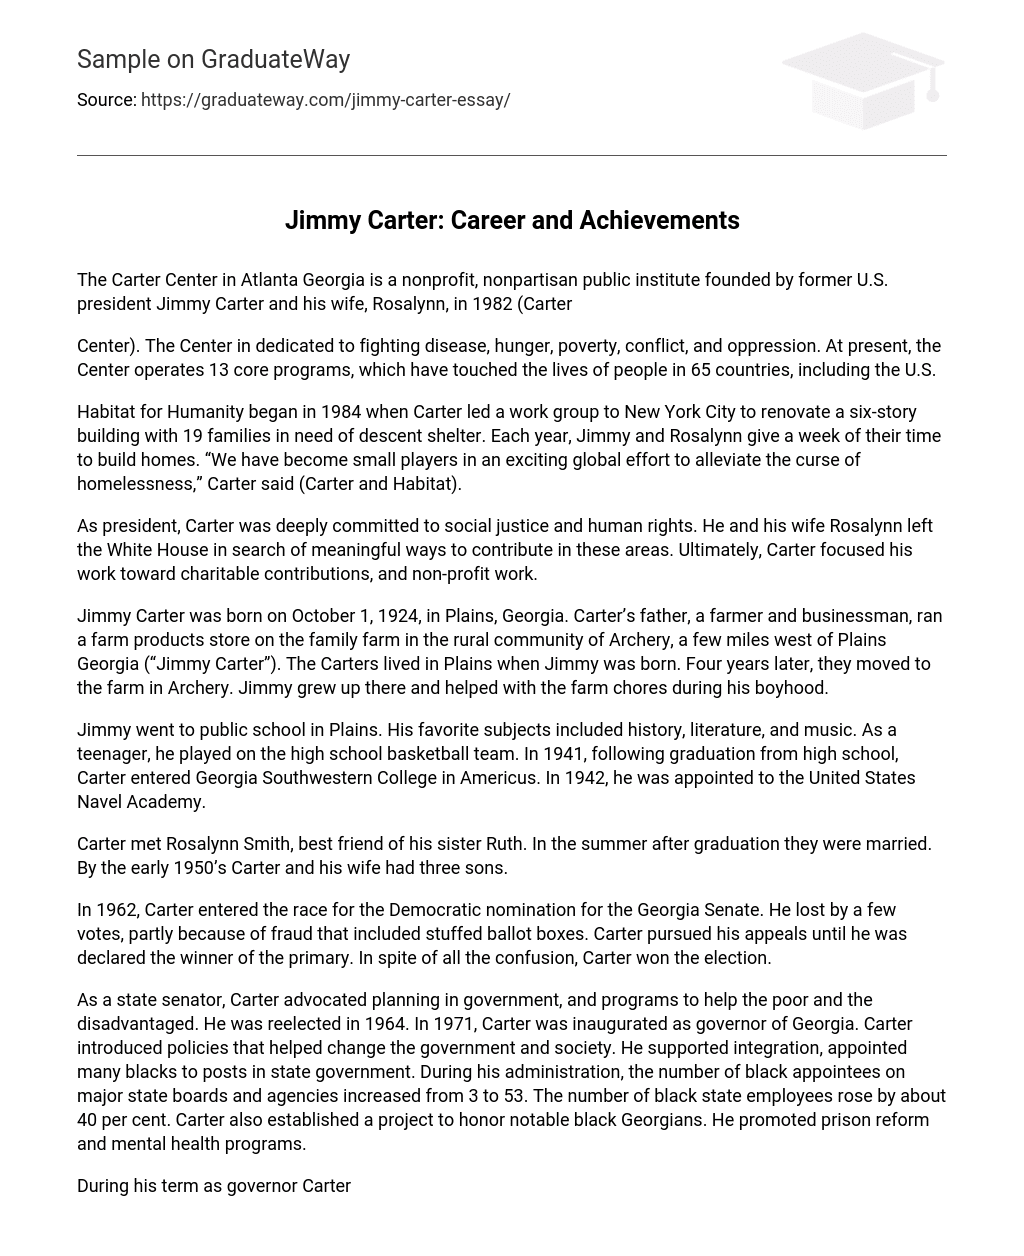 Jimmy Carter: Career and Achievements